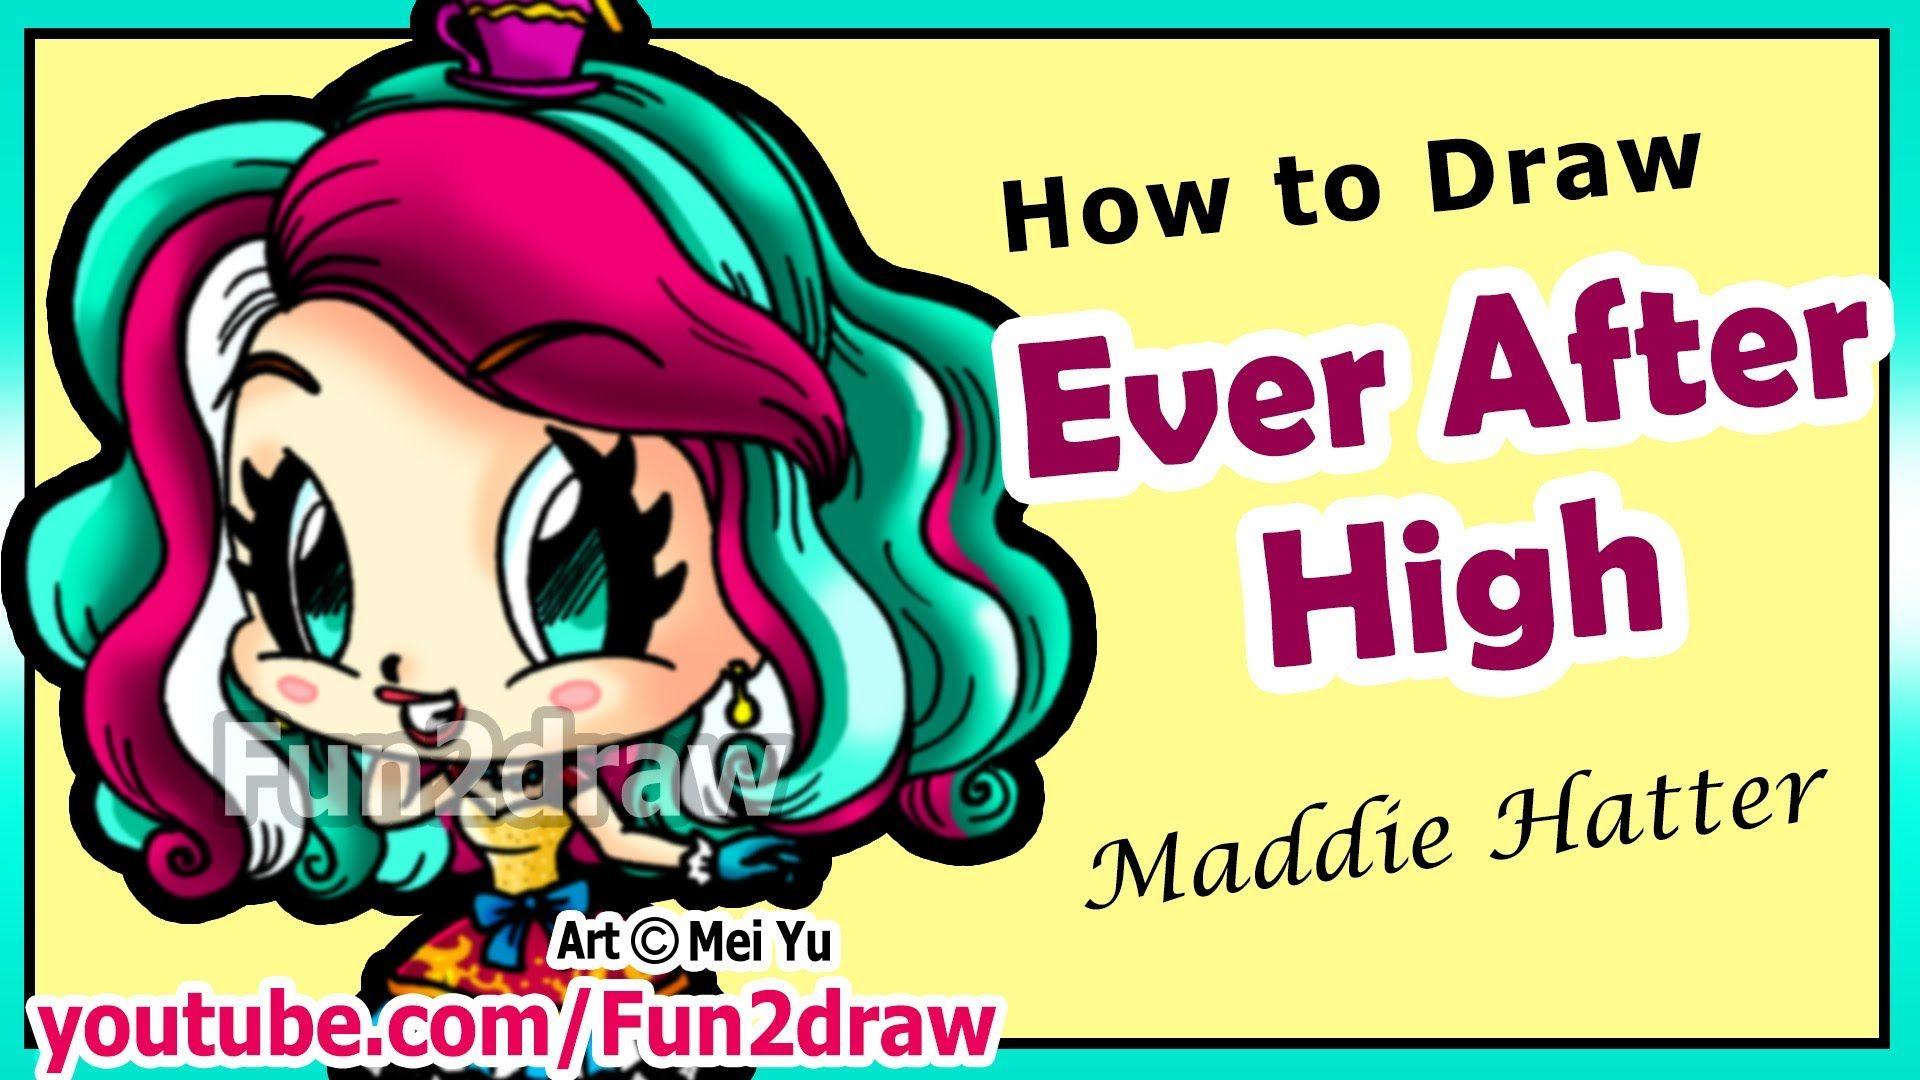 Ever After High Hatter to Draw People